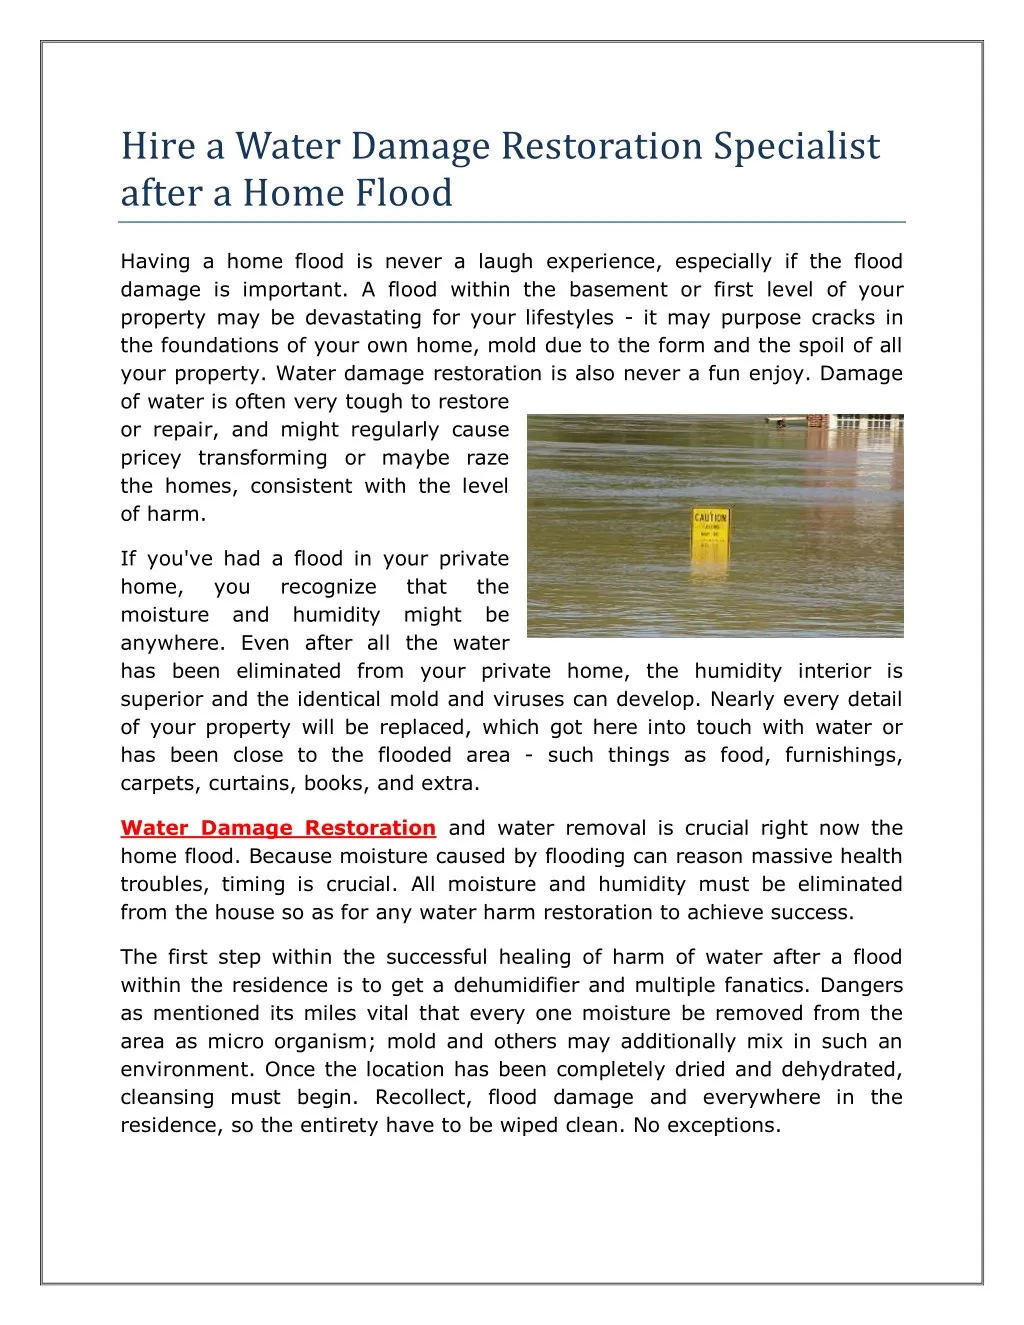 hire a water damage restoration specialist after